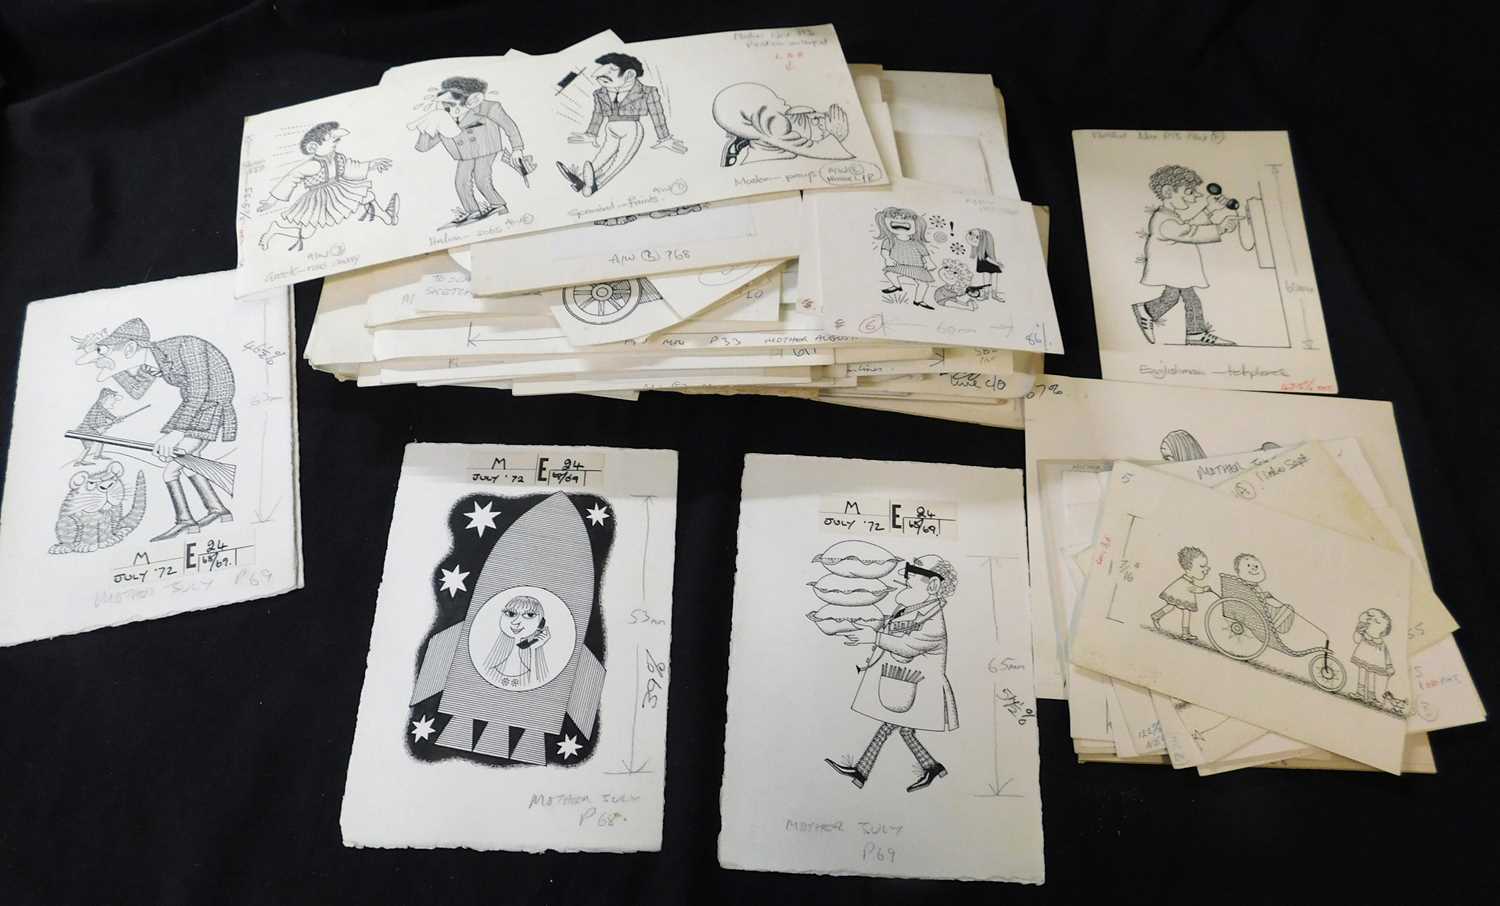 Bruce Angrave (1912-1983), packet circa 80 items original art work, mainly cat based cartoons for